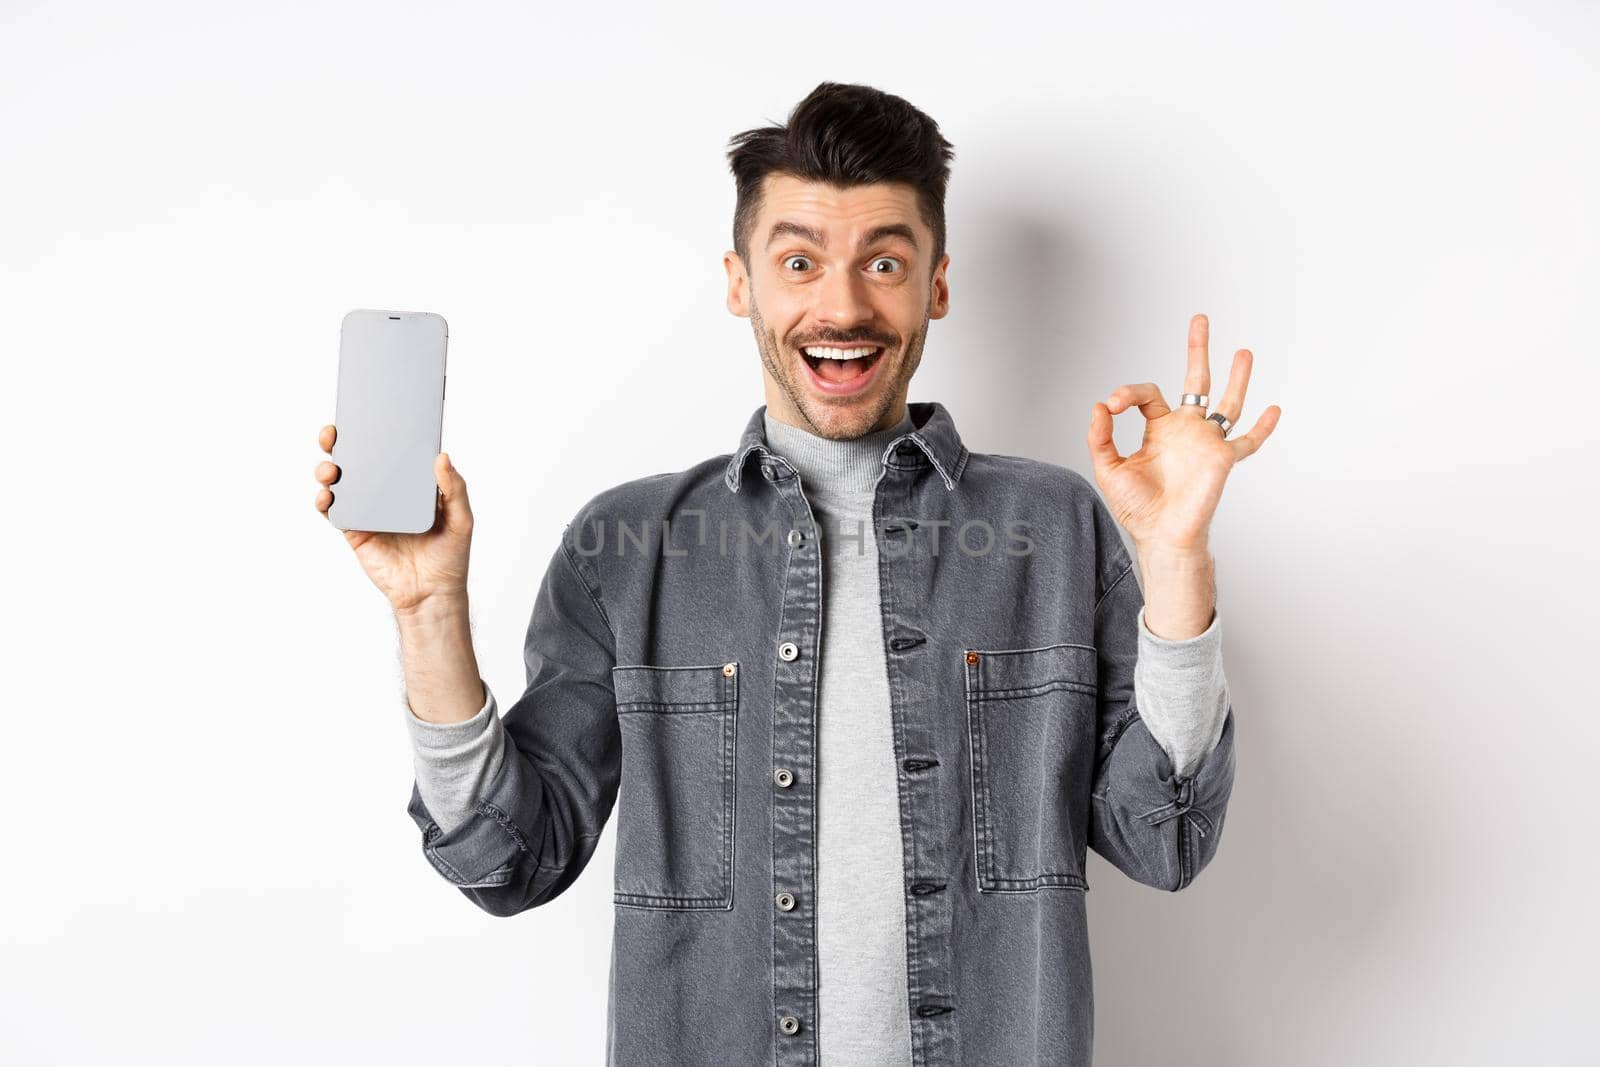 Excited smiling guy showing empty smartphone screen with okay gesture, recommending app or shopping offer, standing on white background.